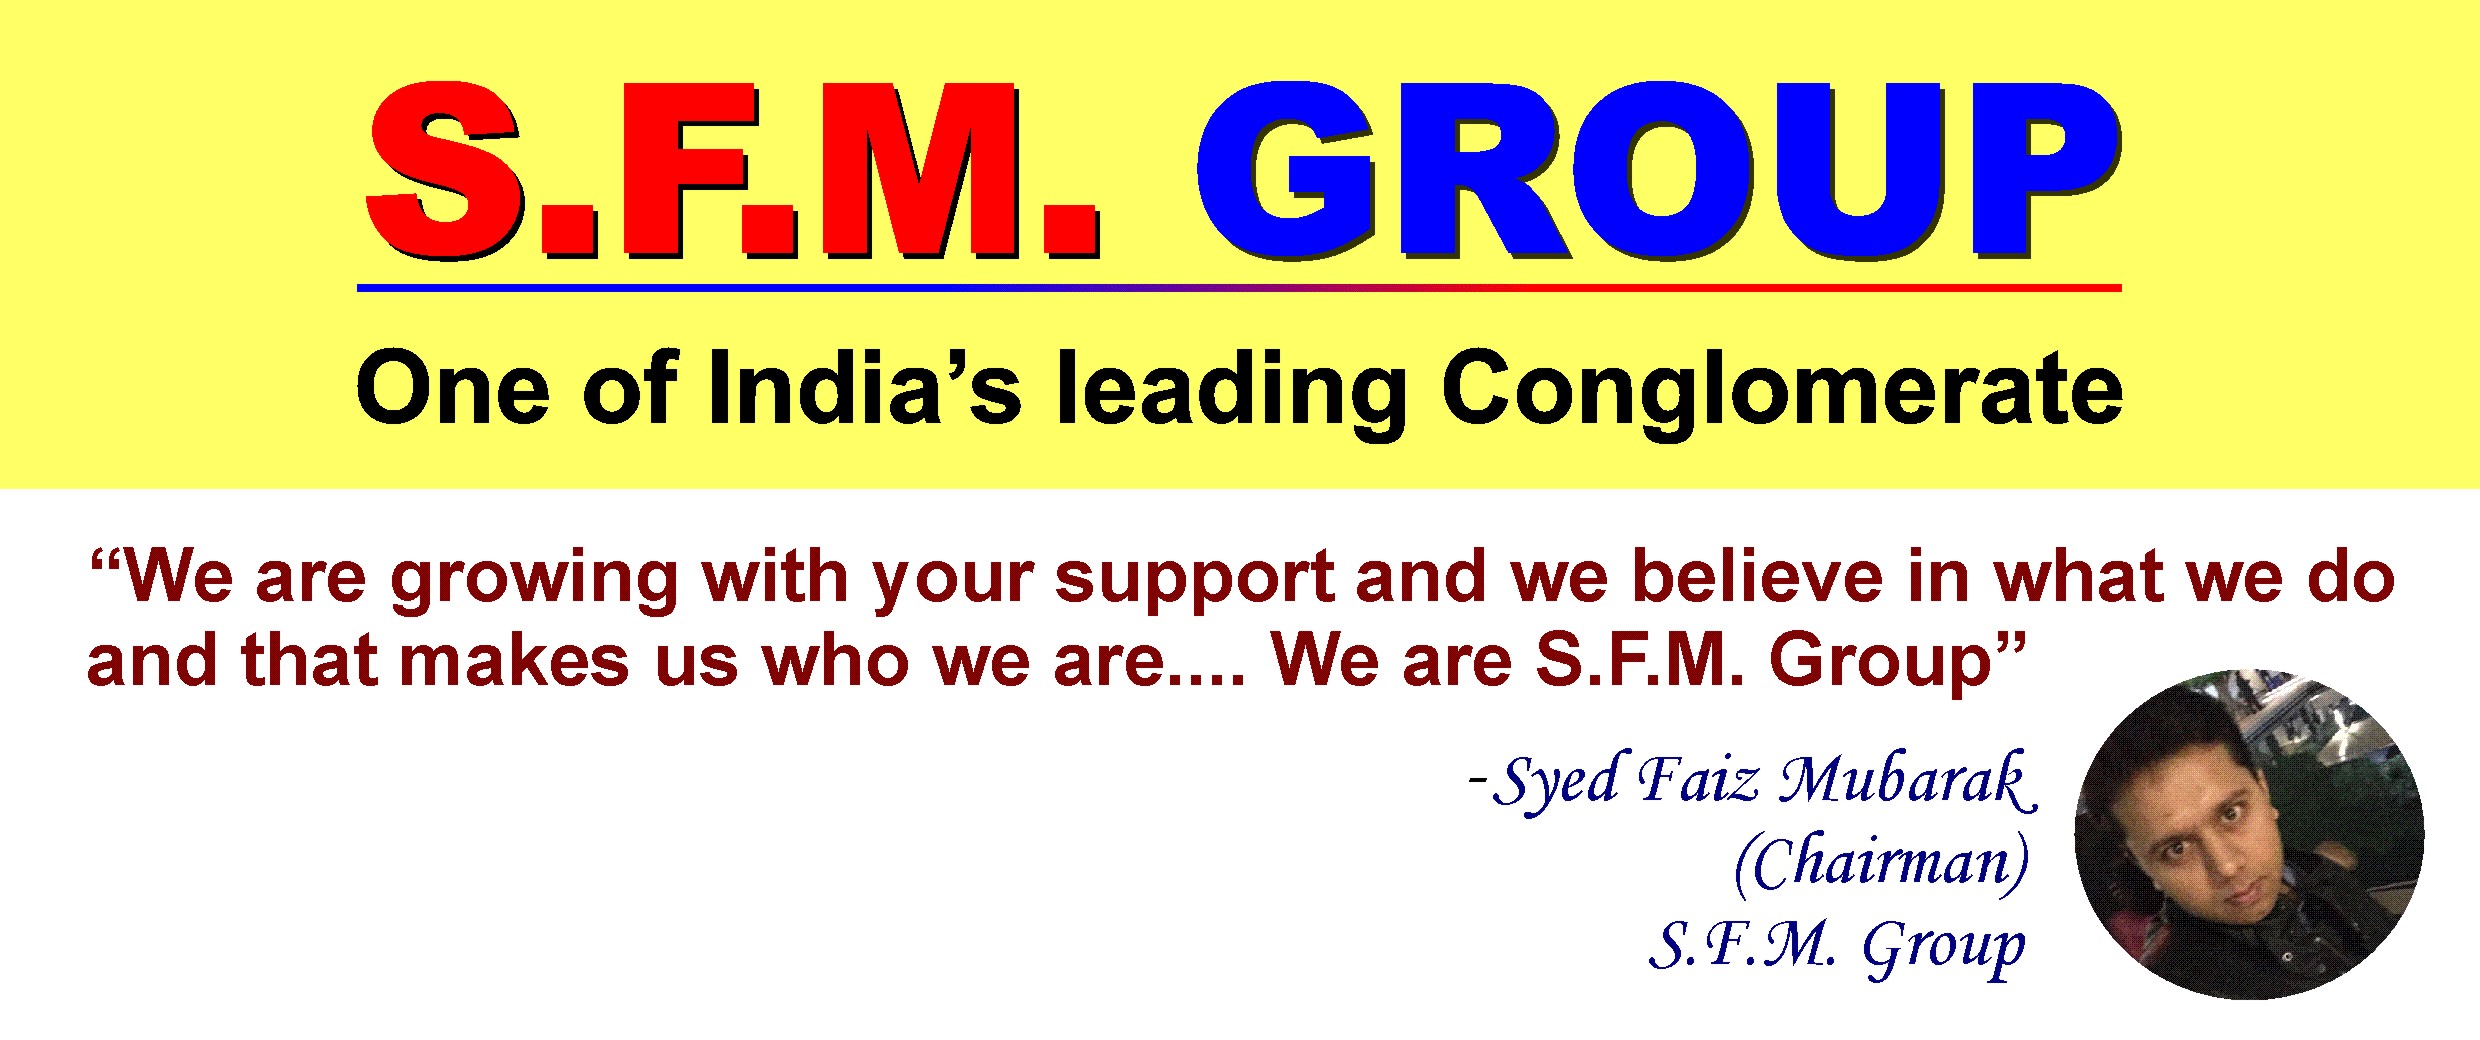 S.F.M. Group One of India's leading Conglomerate 